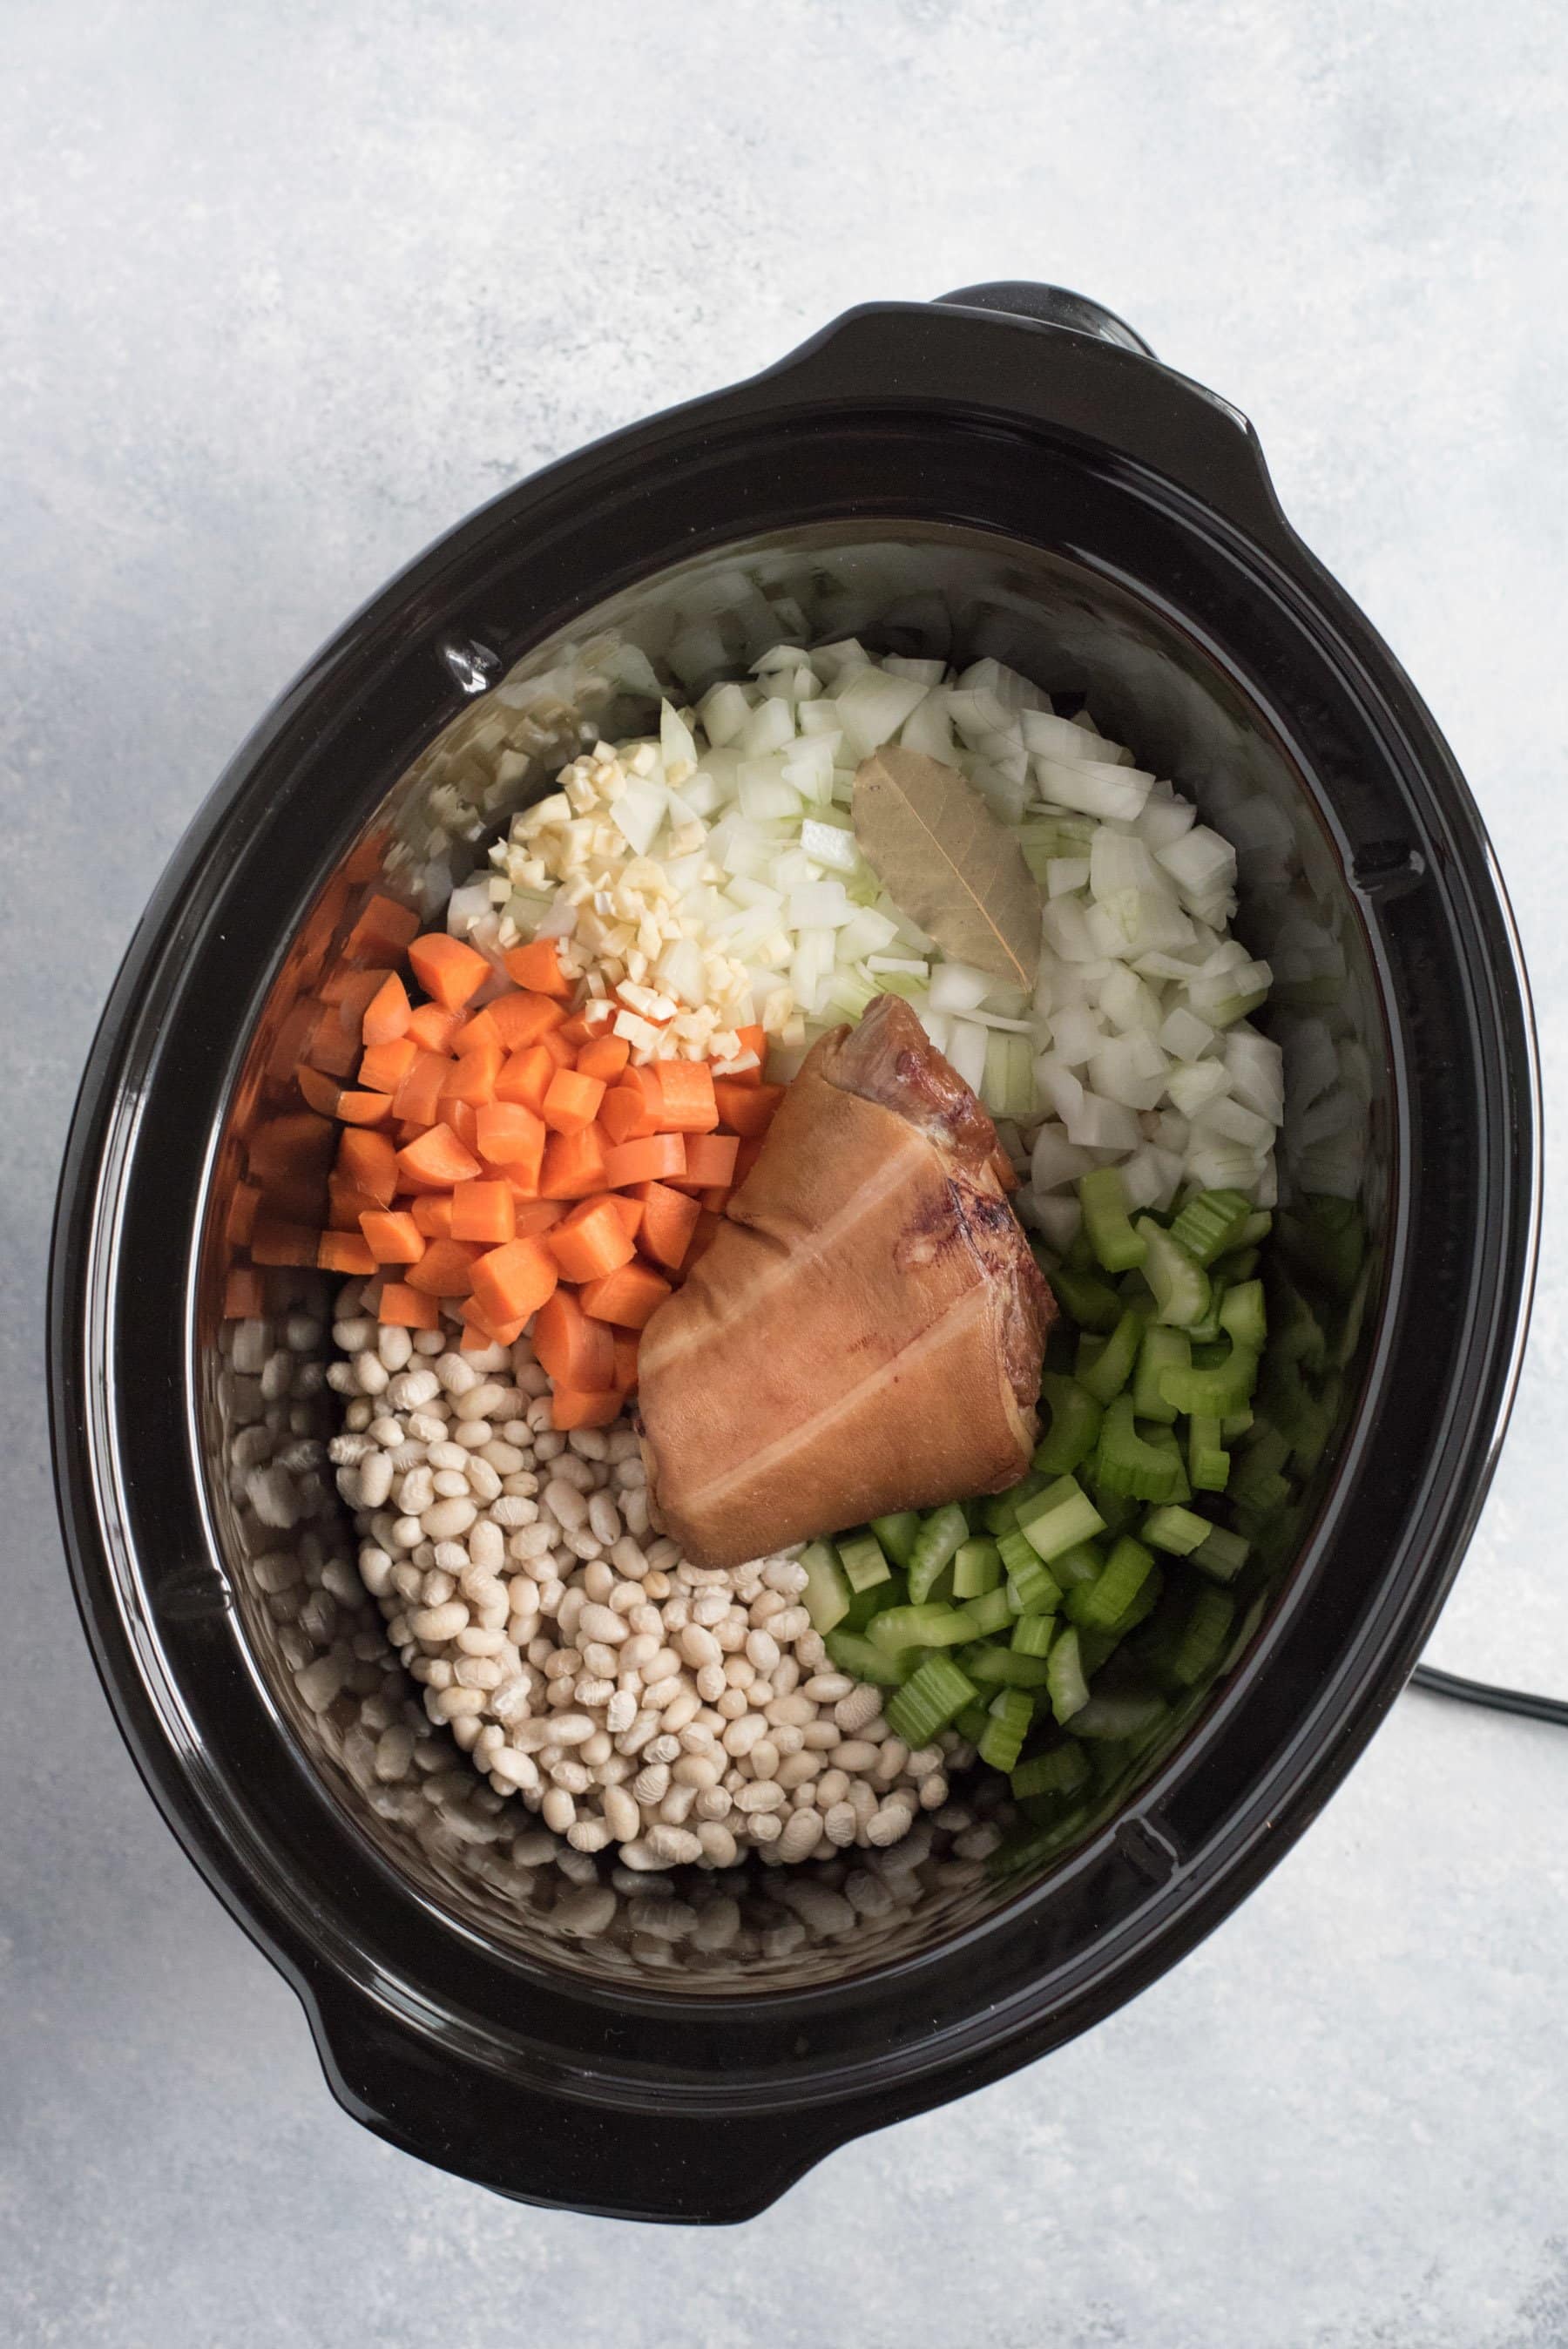 Carrots, onion, bay leaves, celery, dried beans, and a ham hock sit in the black crock of a slow cooker.